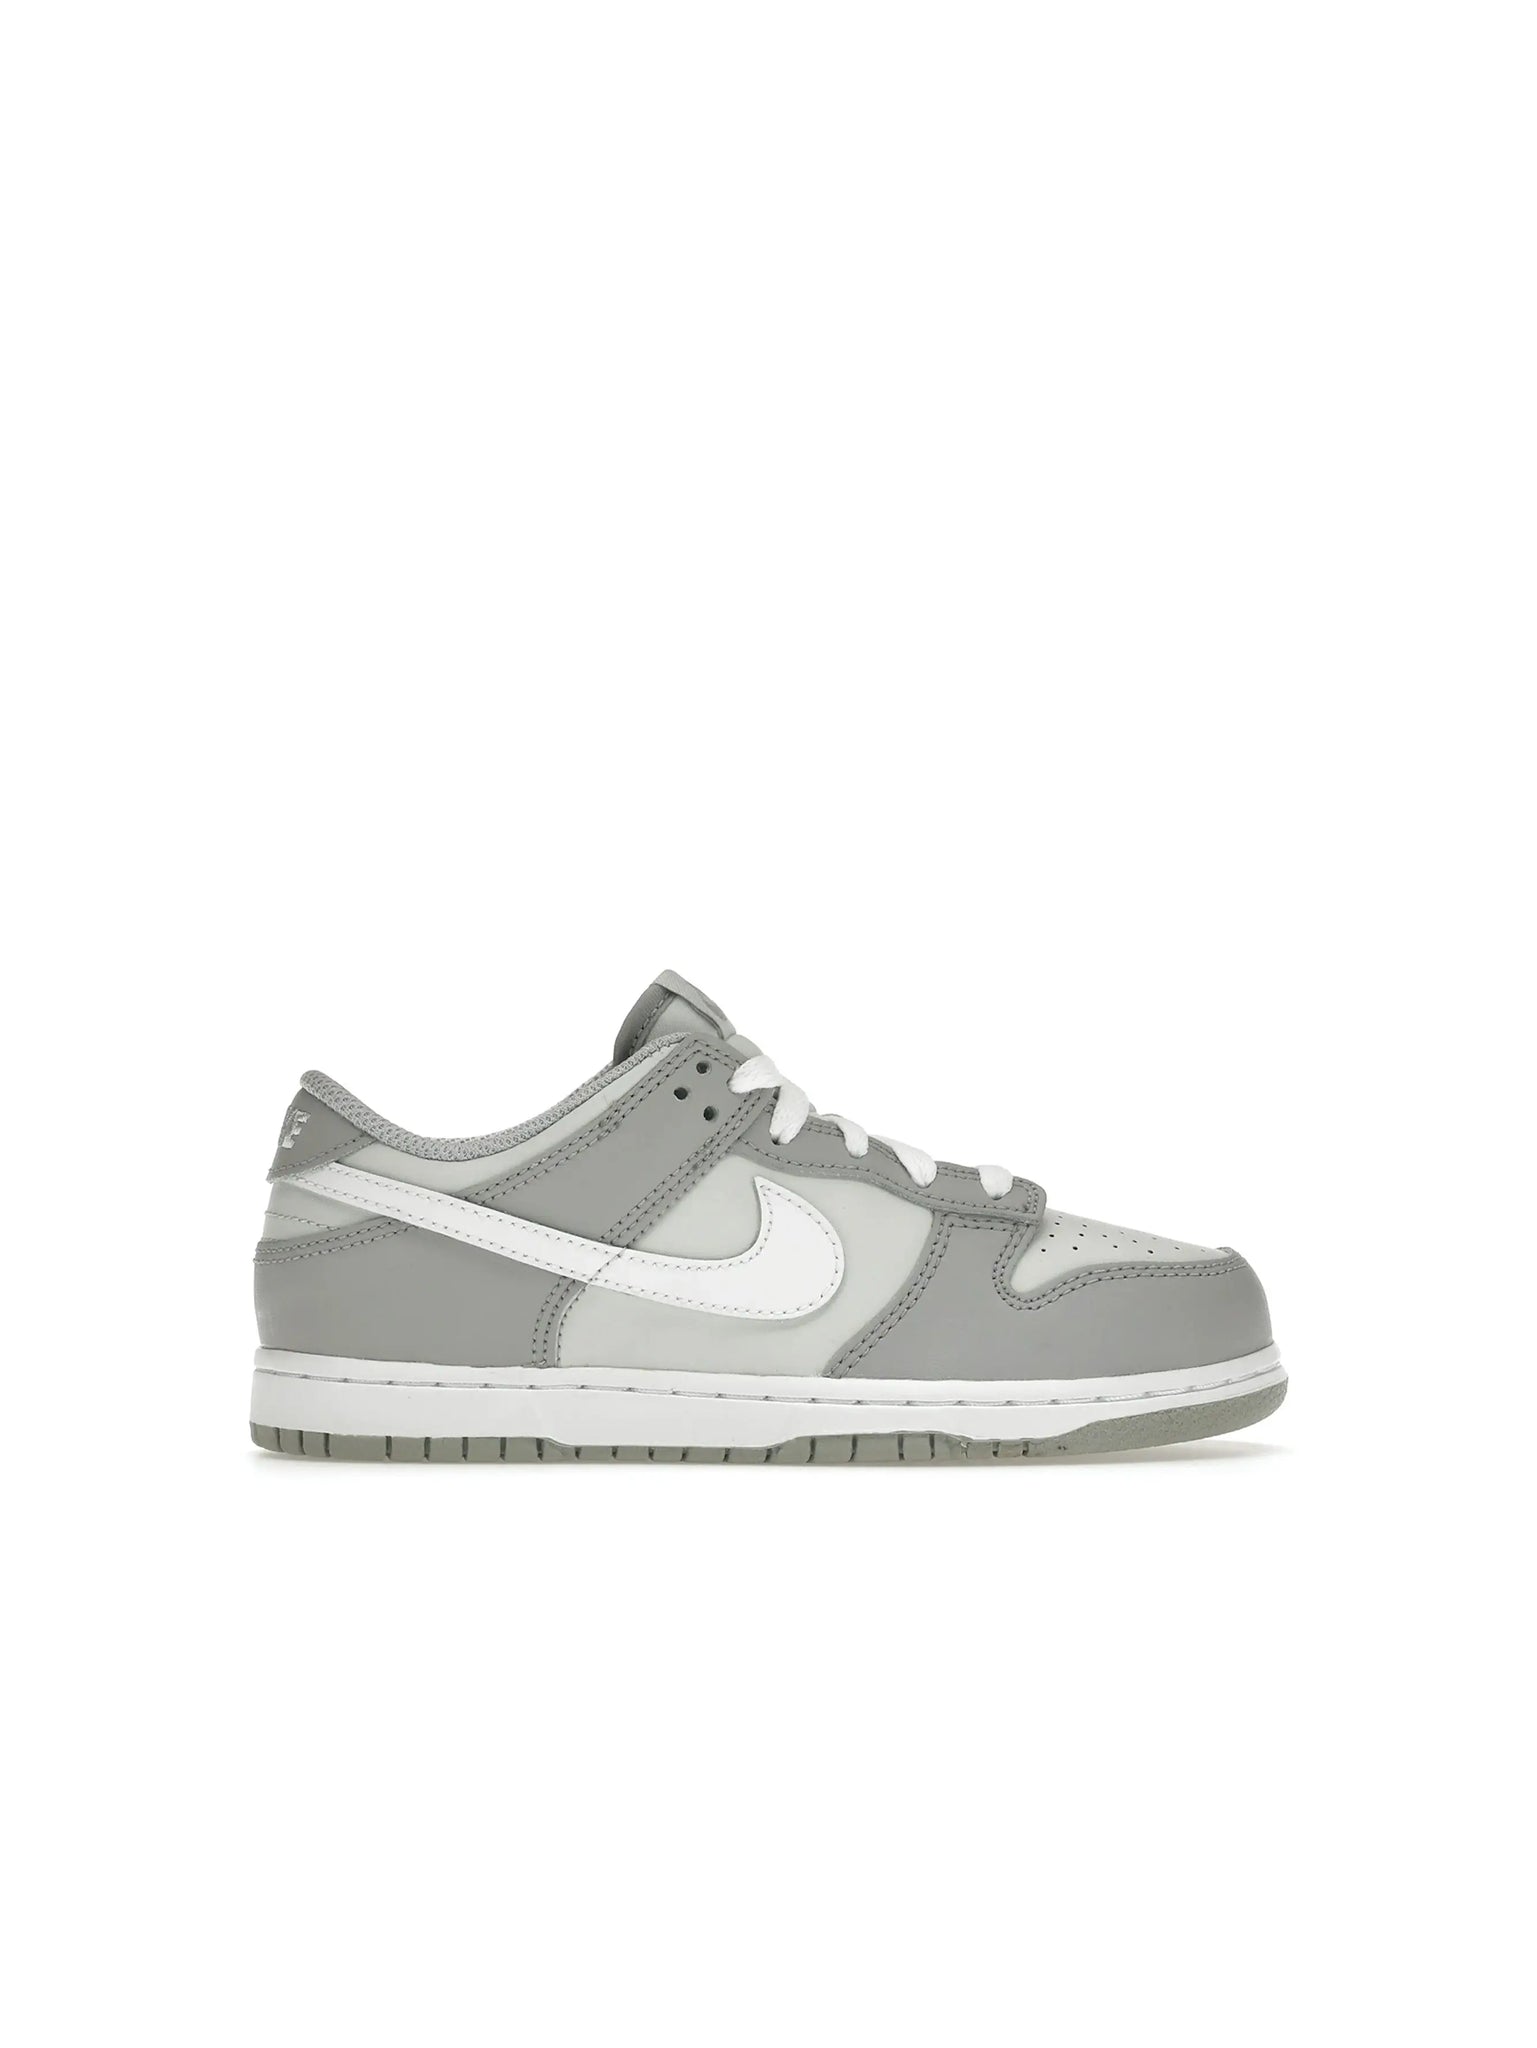 Nike Dunk Low Two-Toned Grey (PS) in Melbourne, Australia - Prior